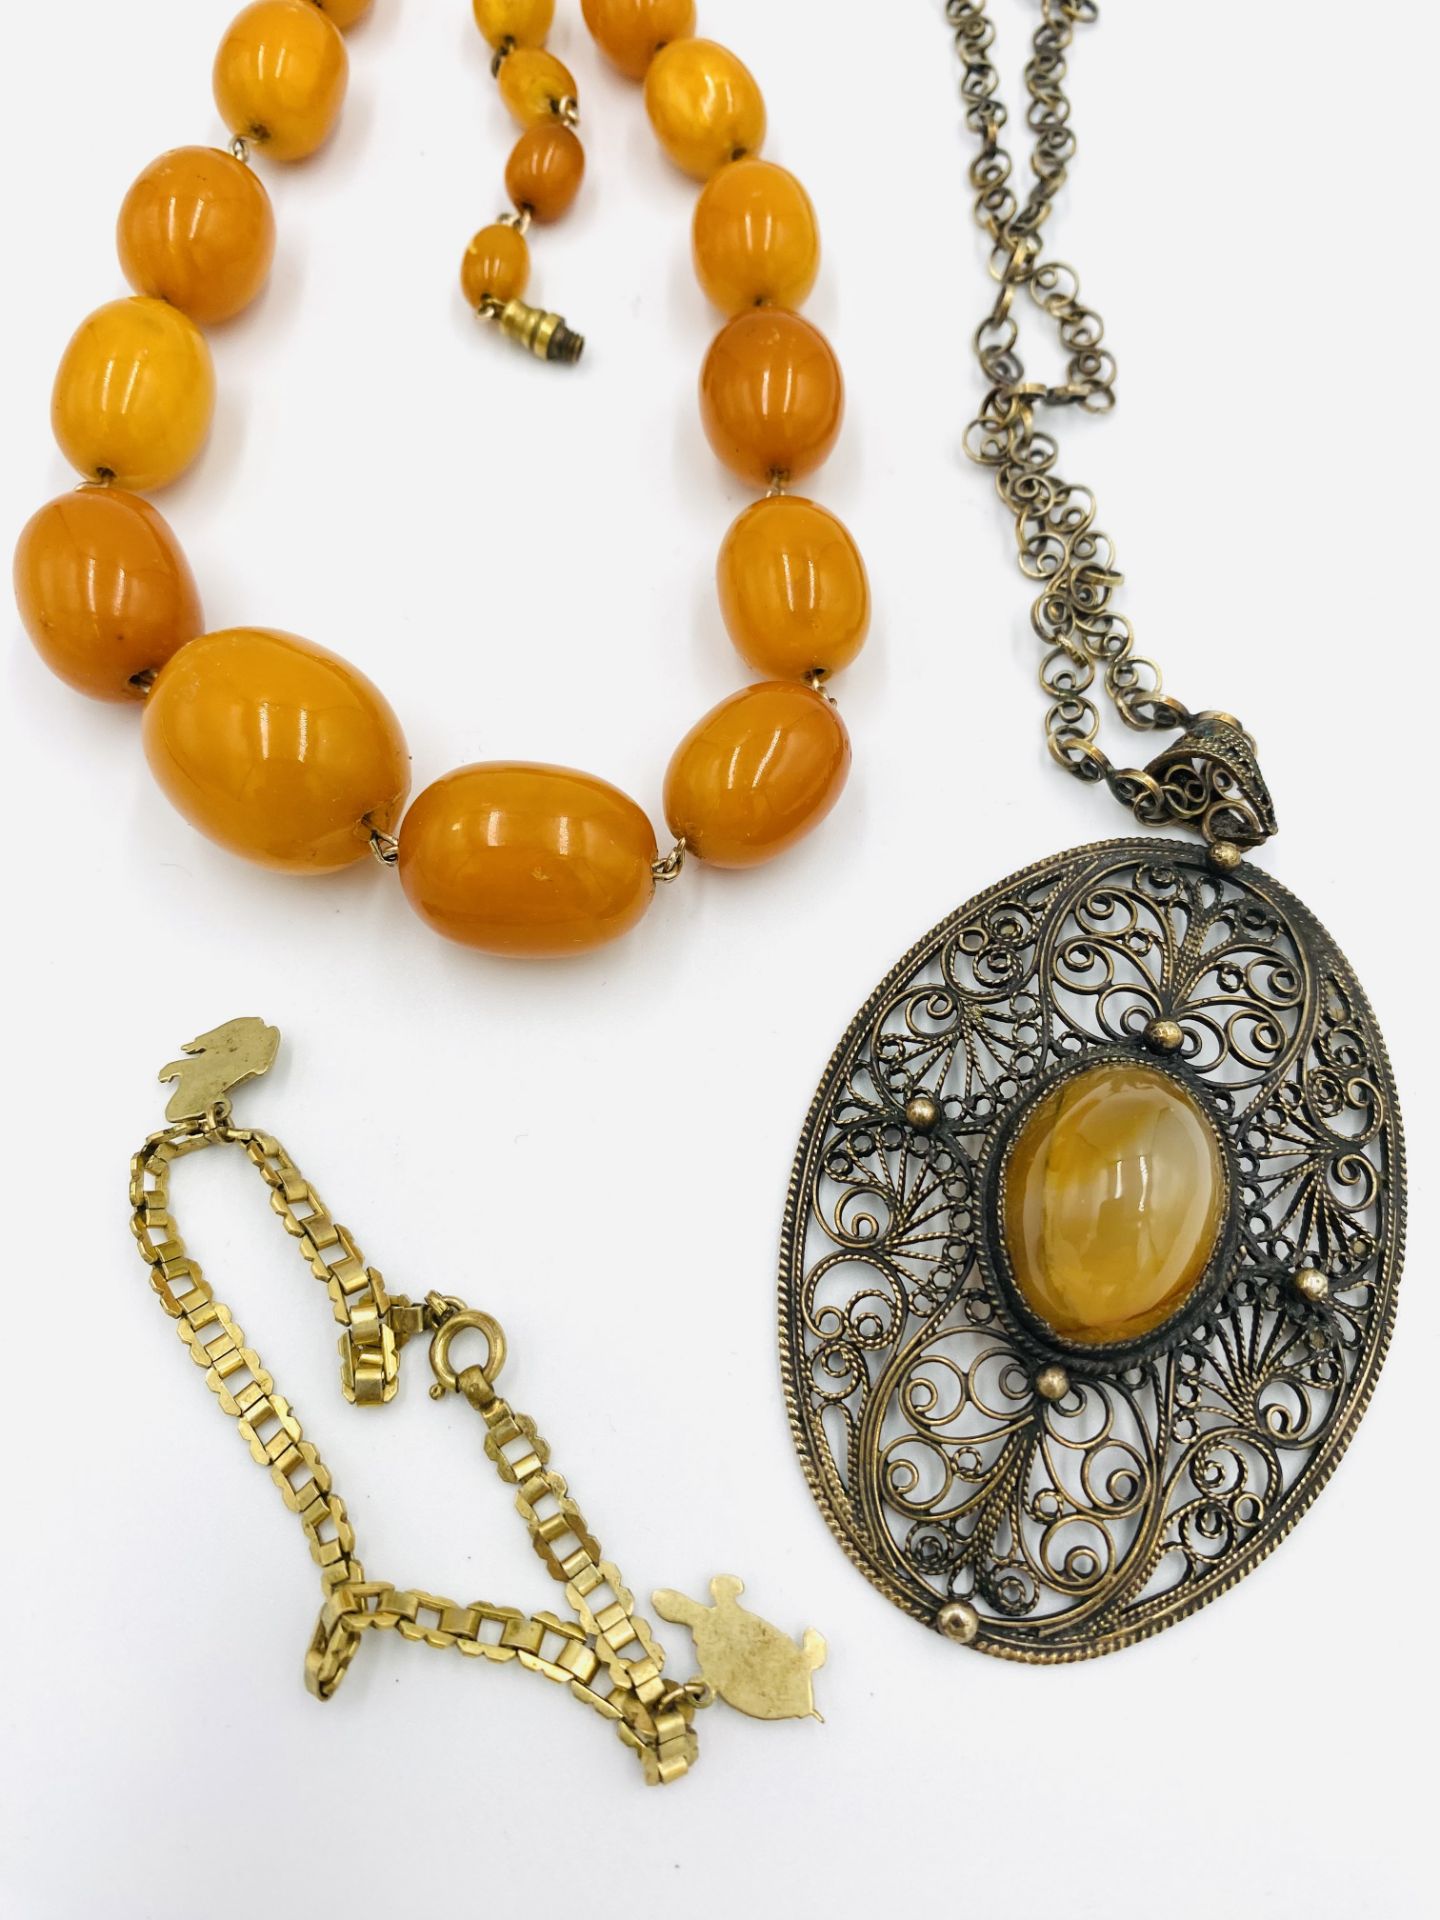 Amber bead necklace; filigree pendant necklace and a child's charm bracelet - Image 2 of 4